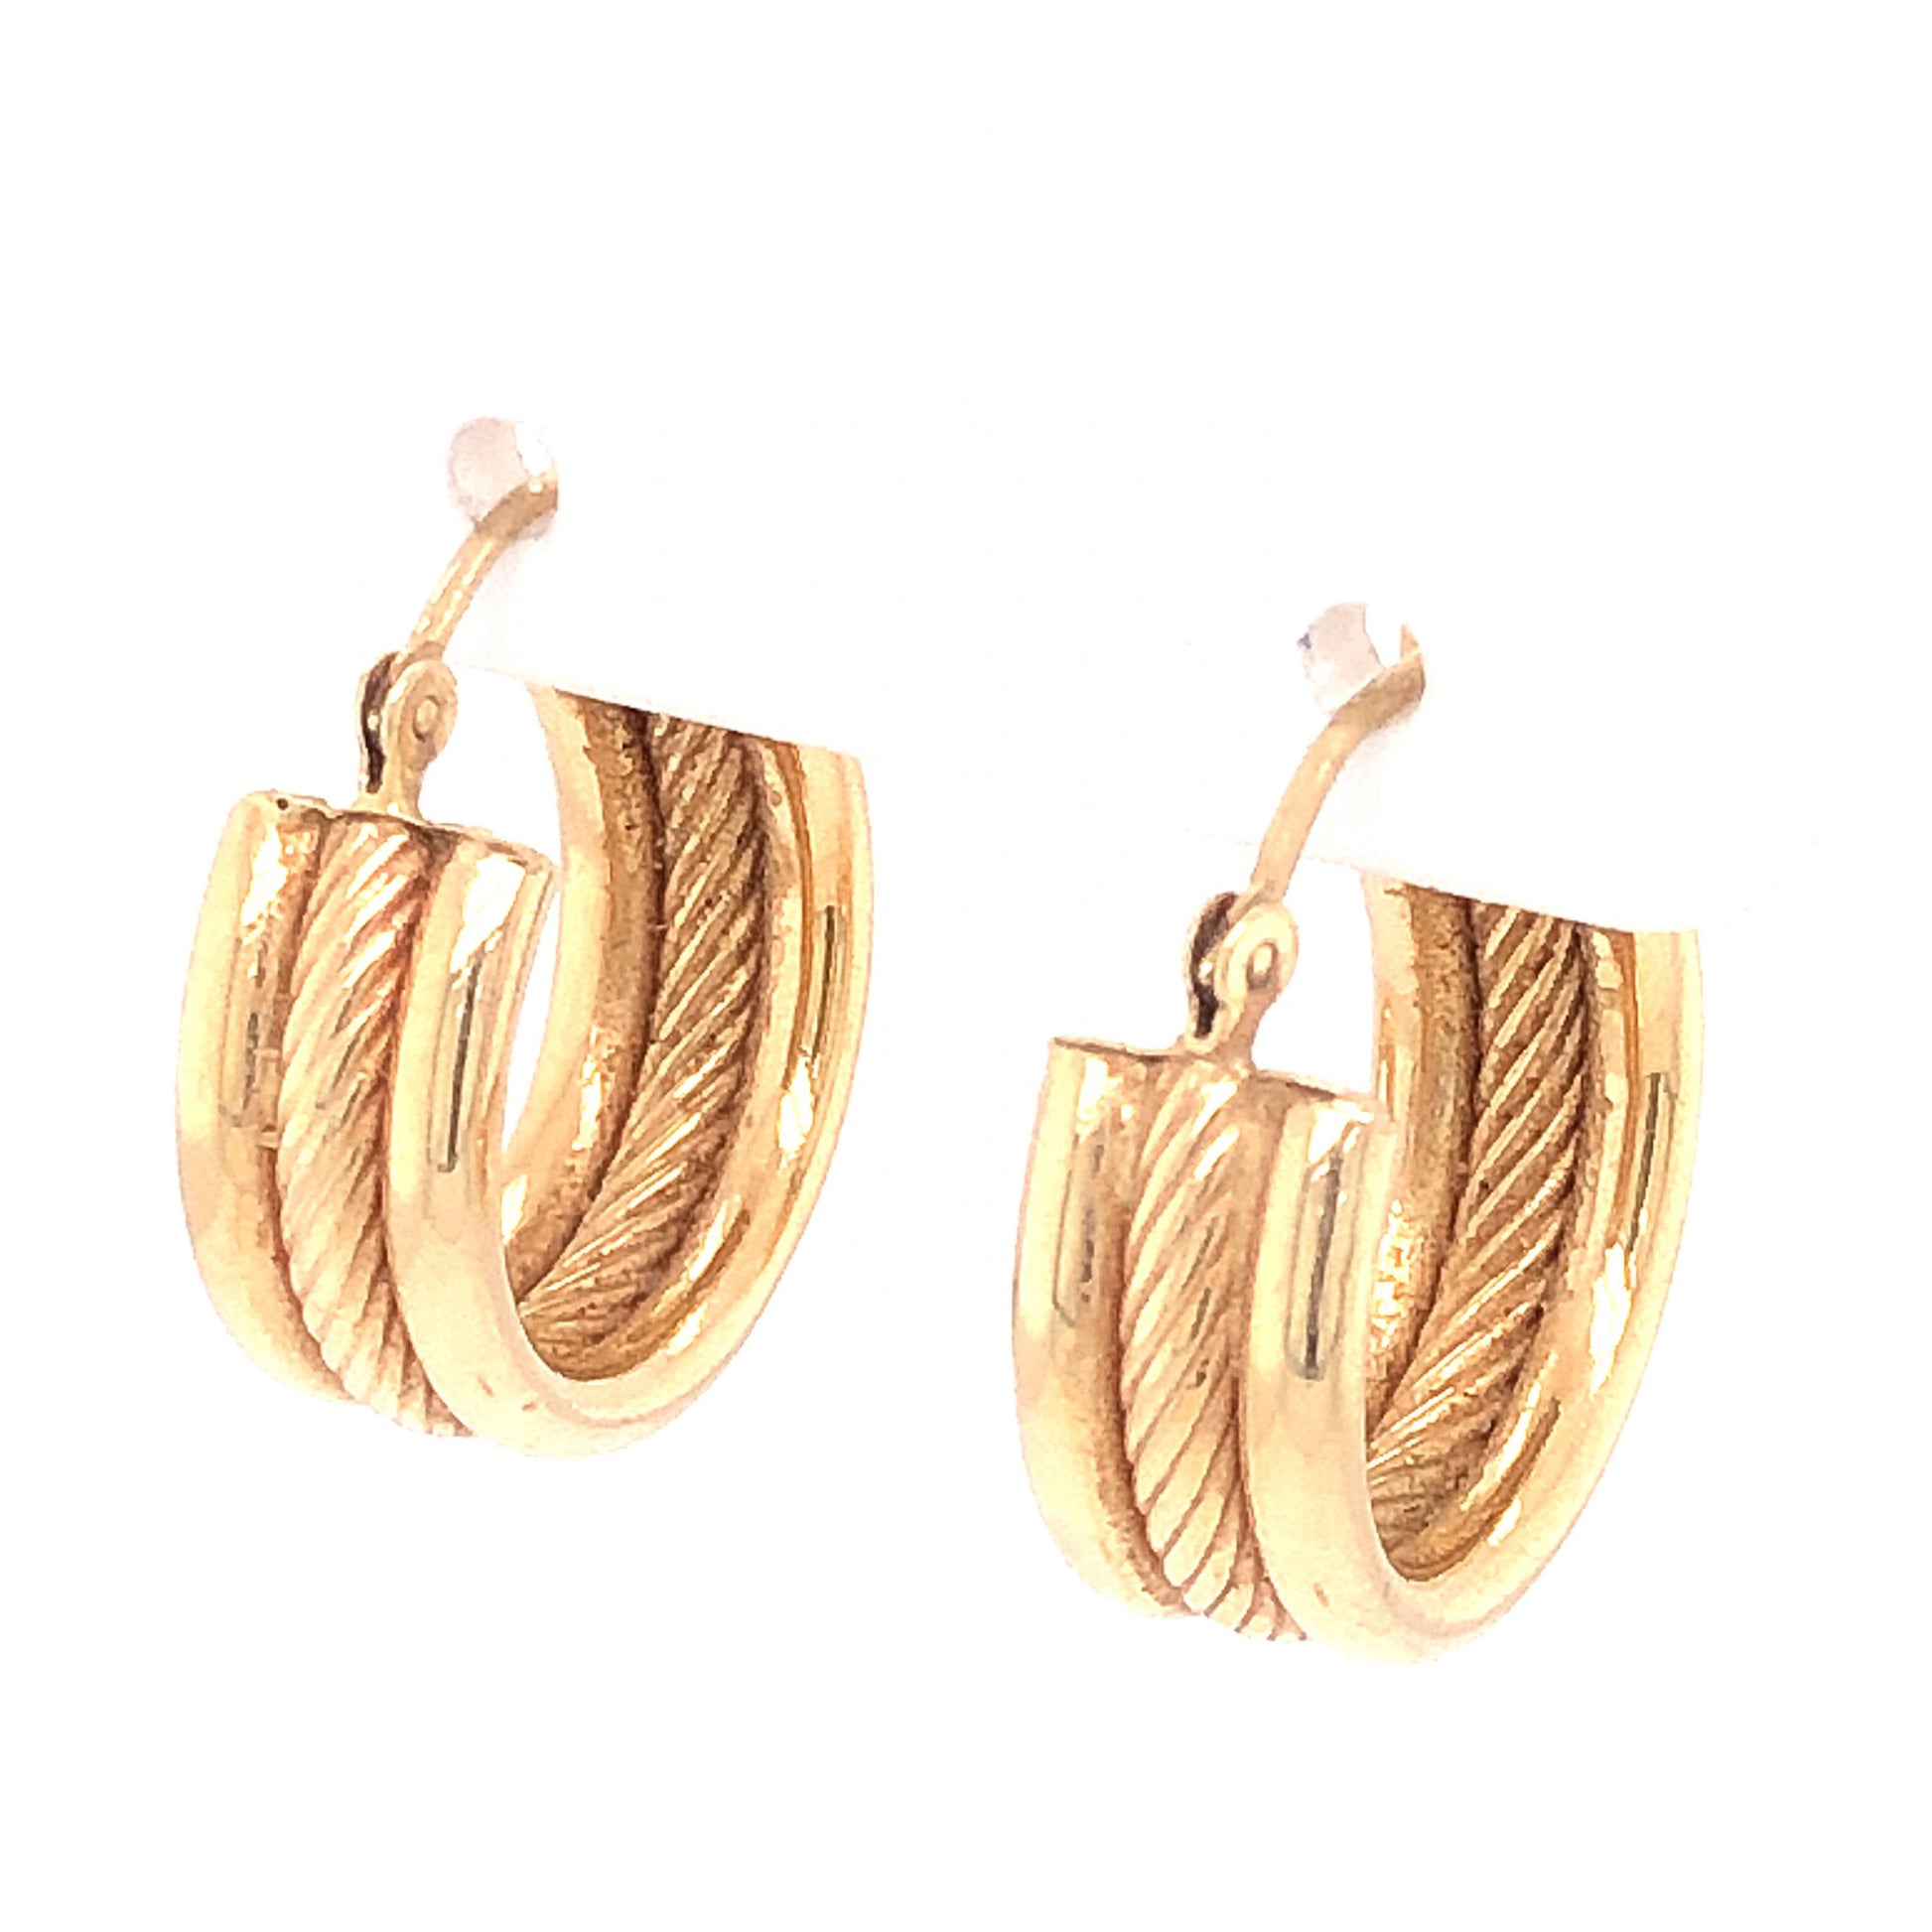 Small Textured Hoop Earrings in 14k Yellow GoldComposition: Platinum Total Gram Weight: 2.5 g Inscription: 14k MB
      